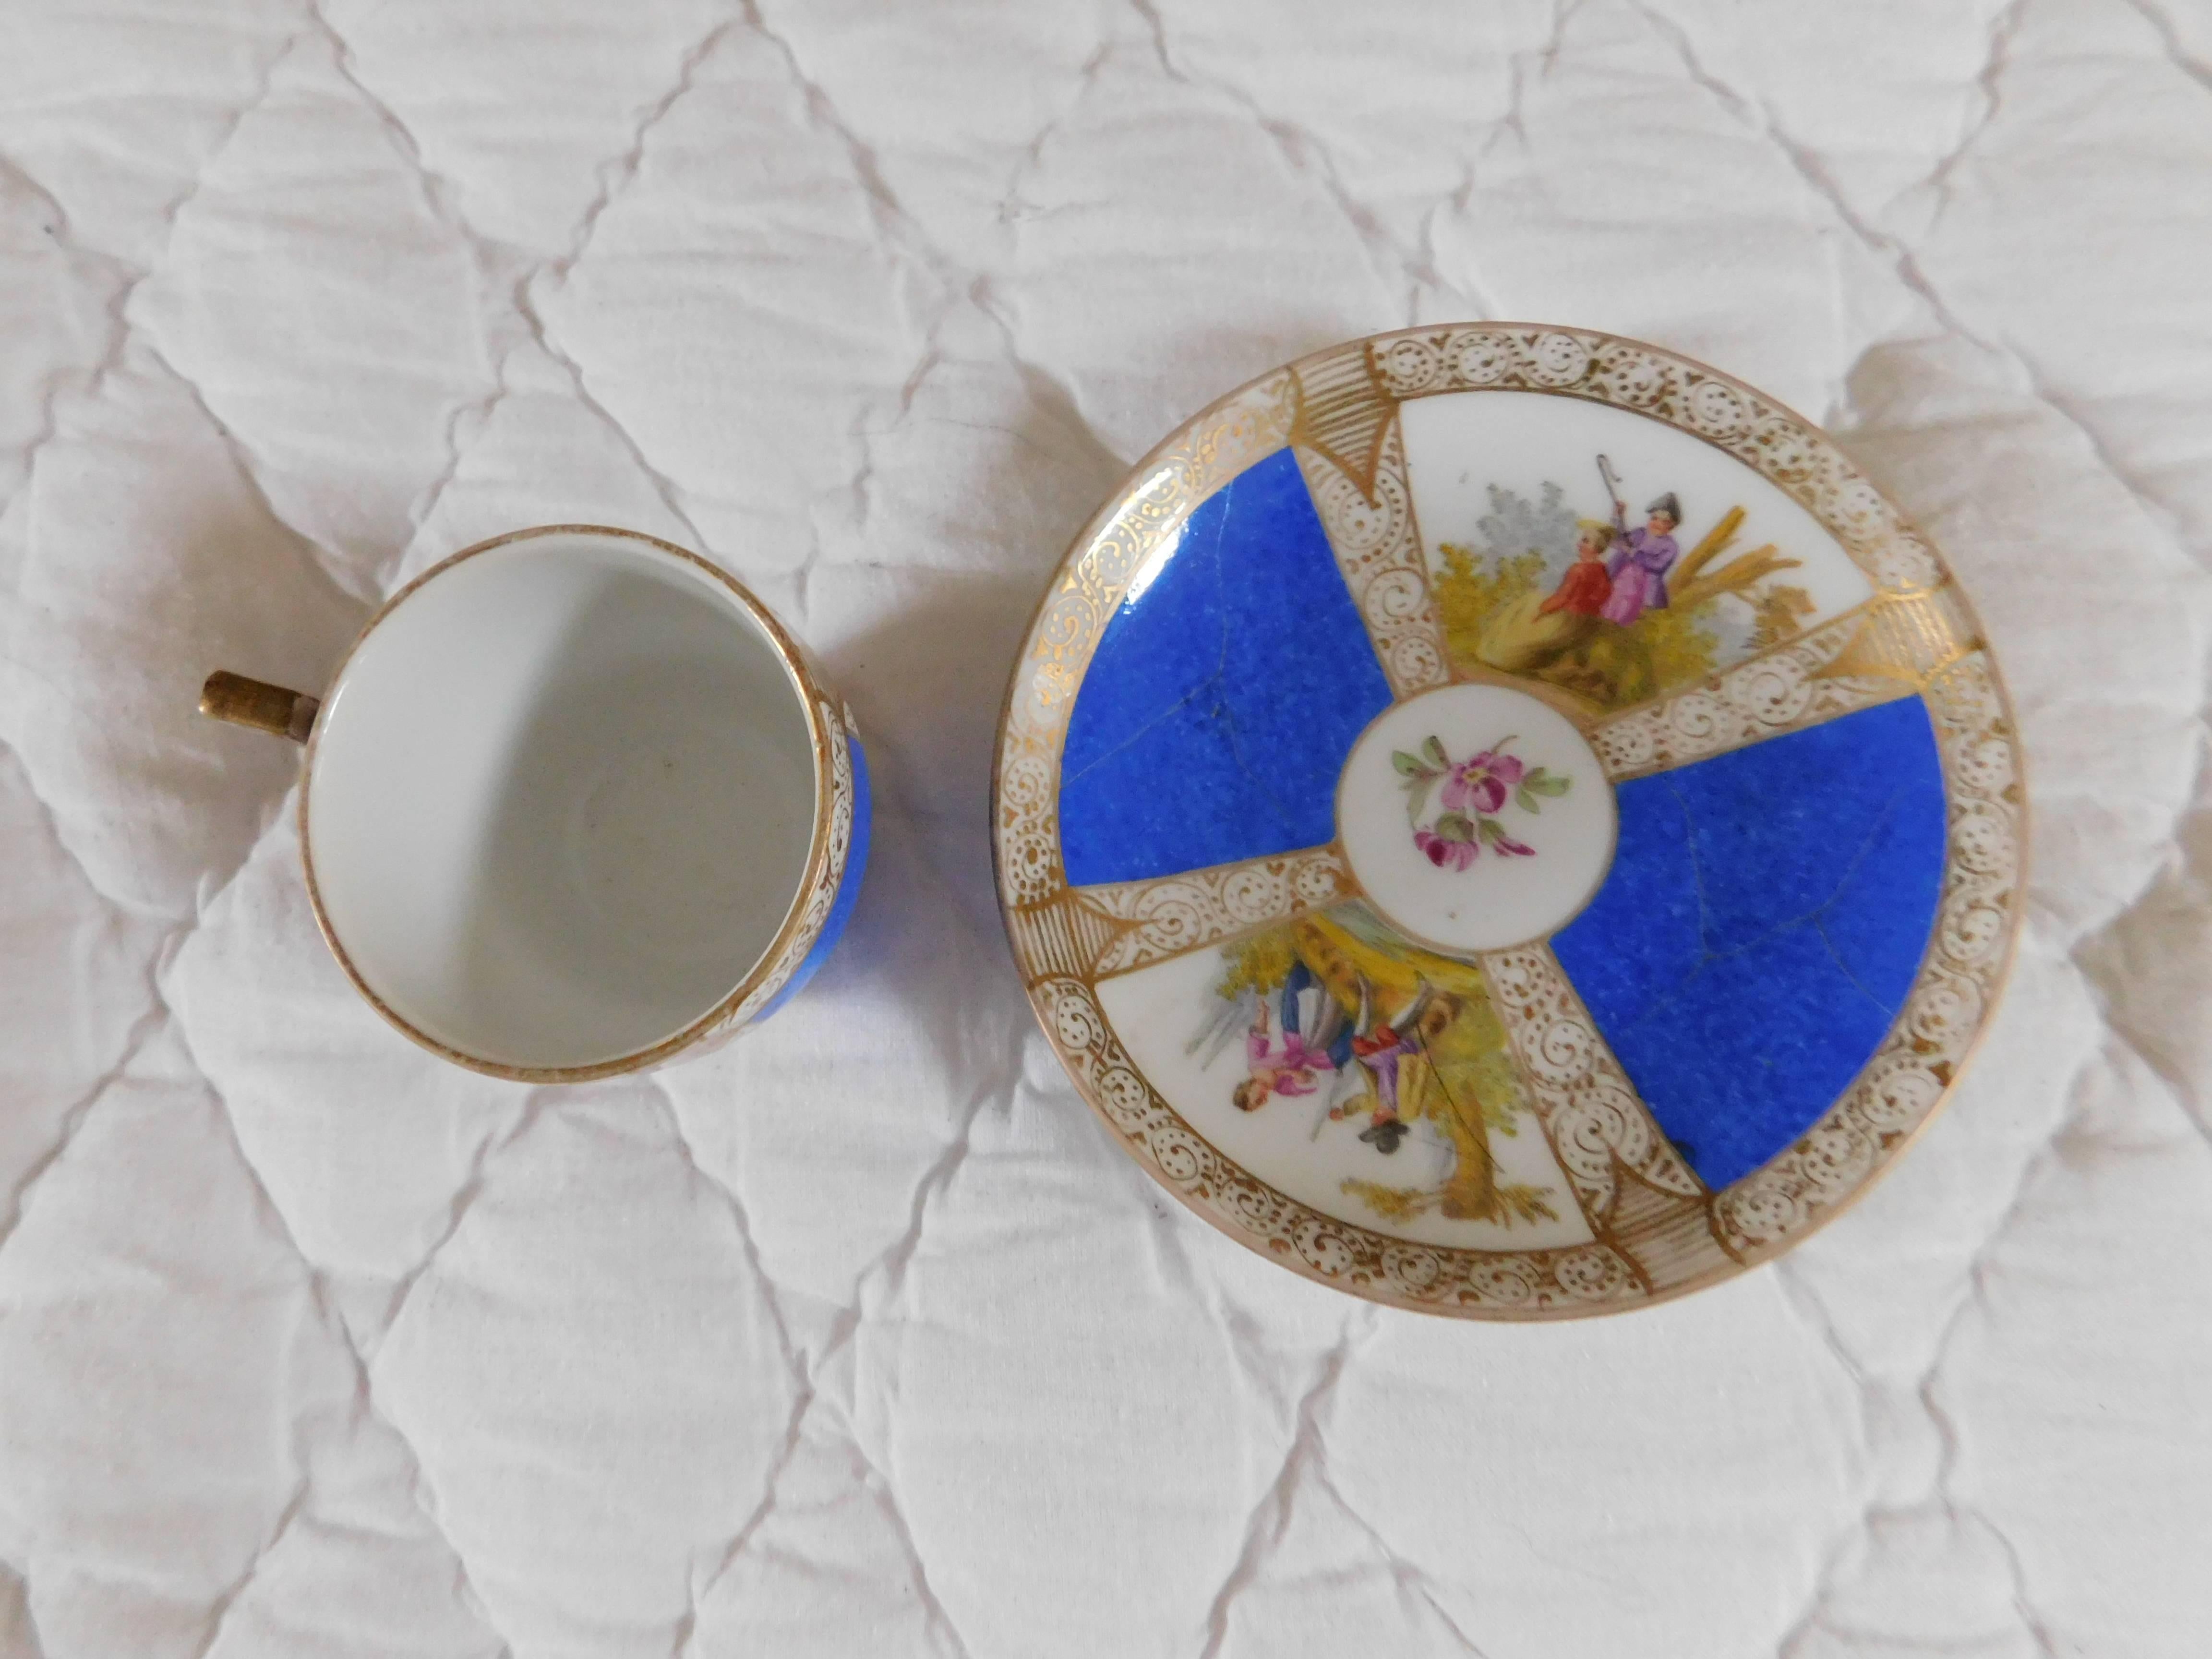 19th Century Meissen Porcelain Cup and Saucer For Sale 2